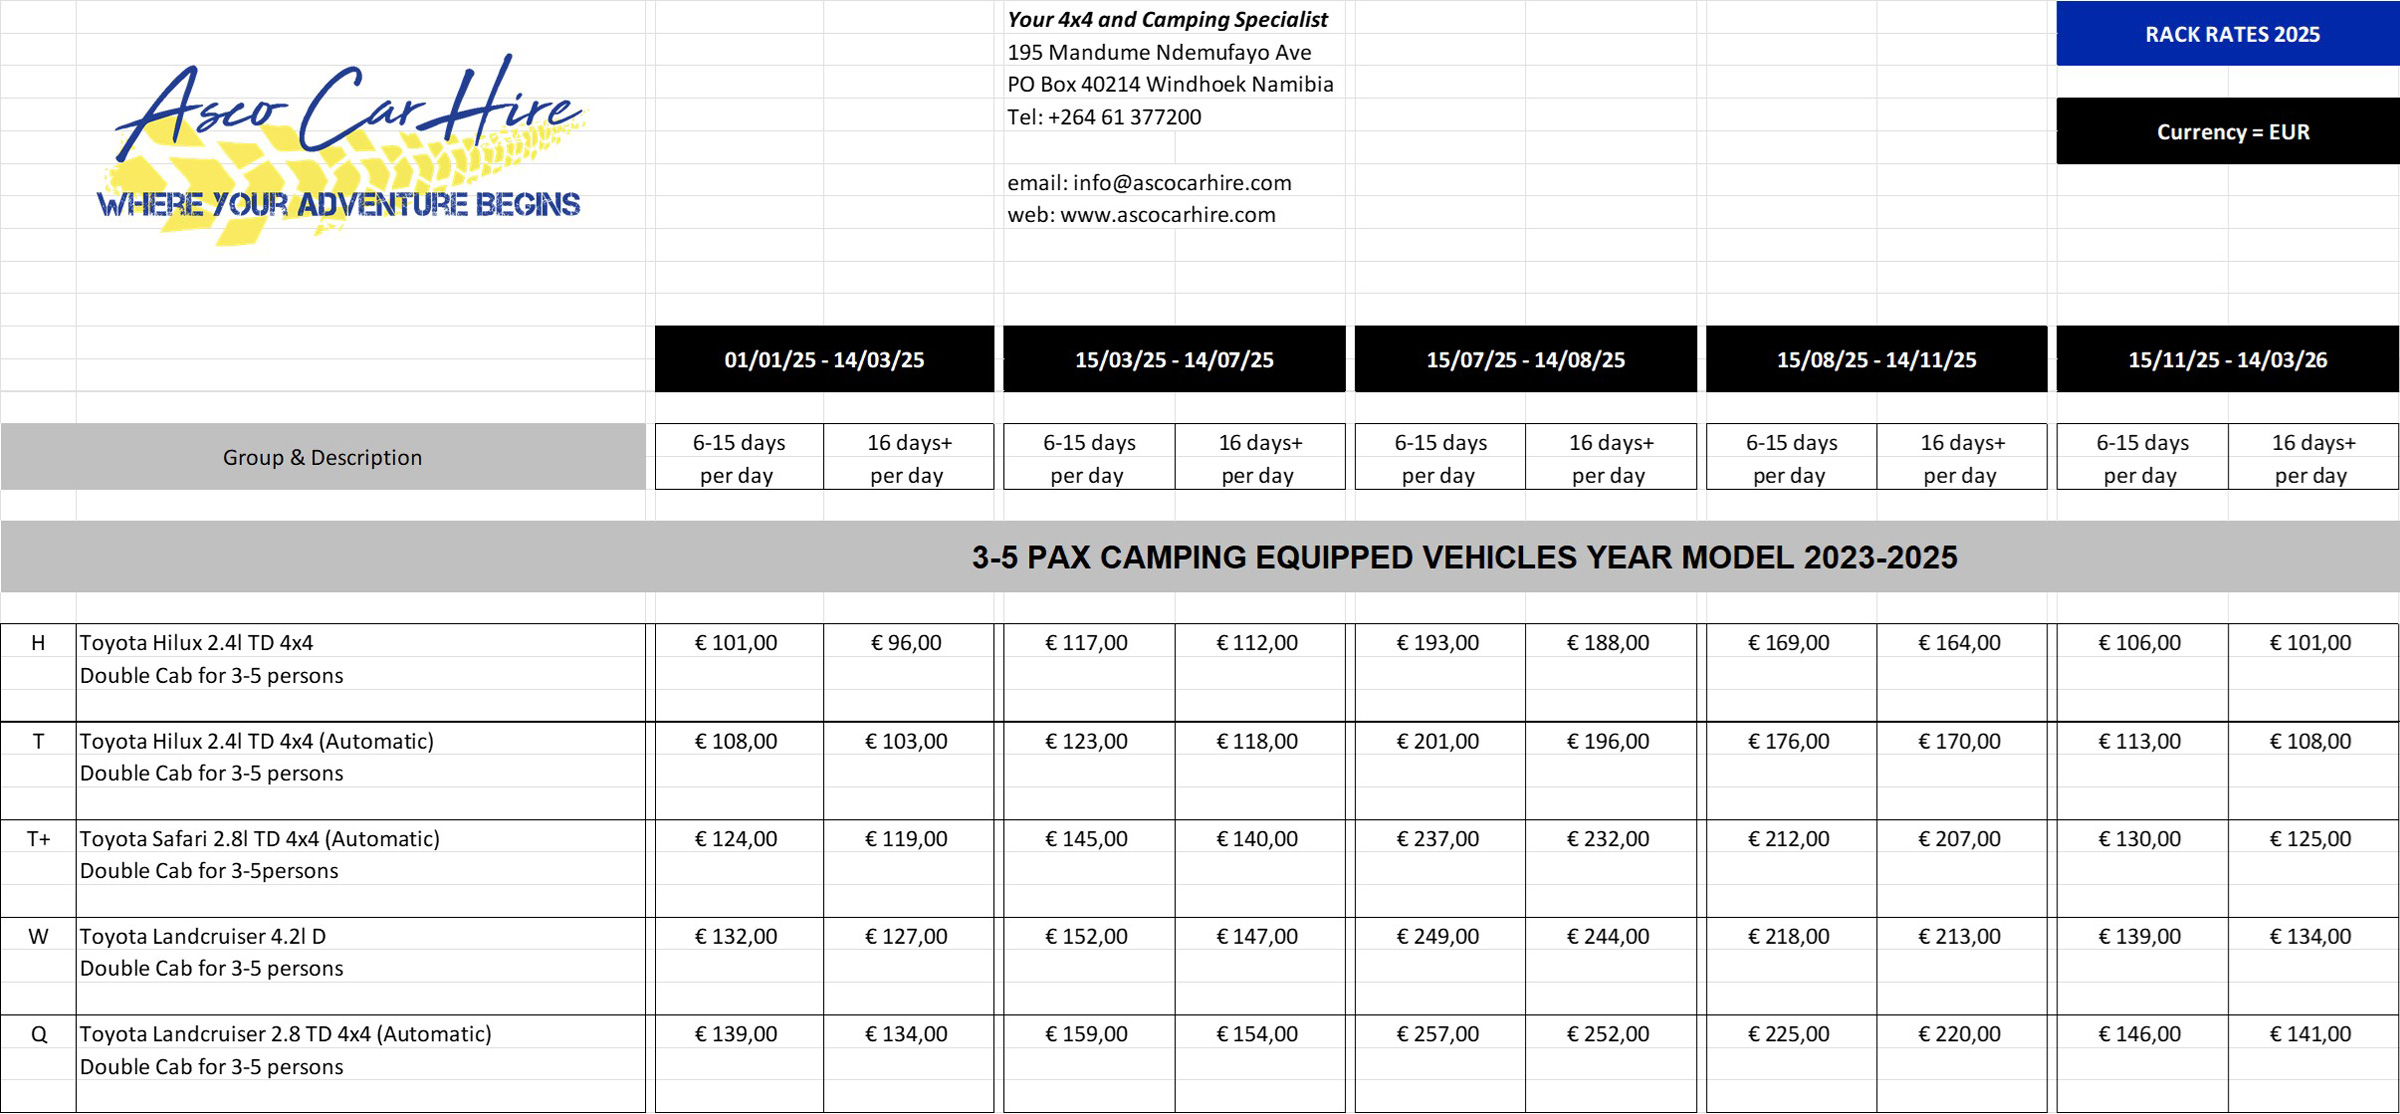 Asco Car Hire Rates 2025 Camping Vehicles 3-5 persons